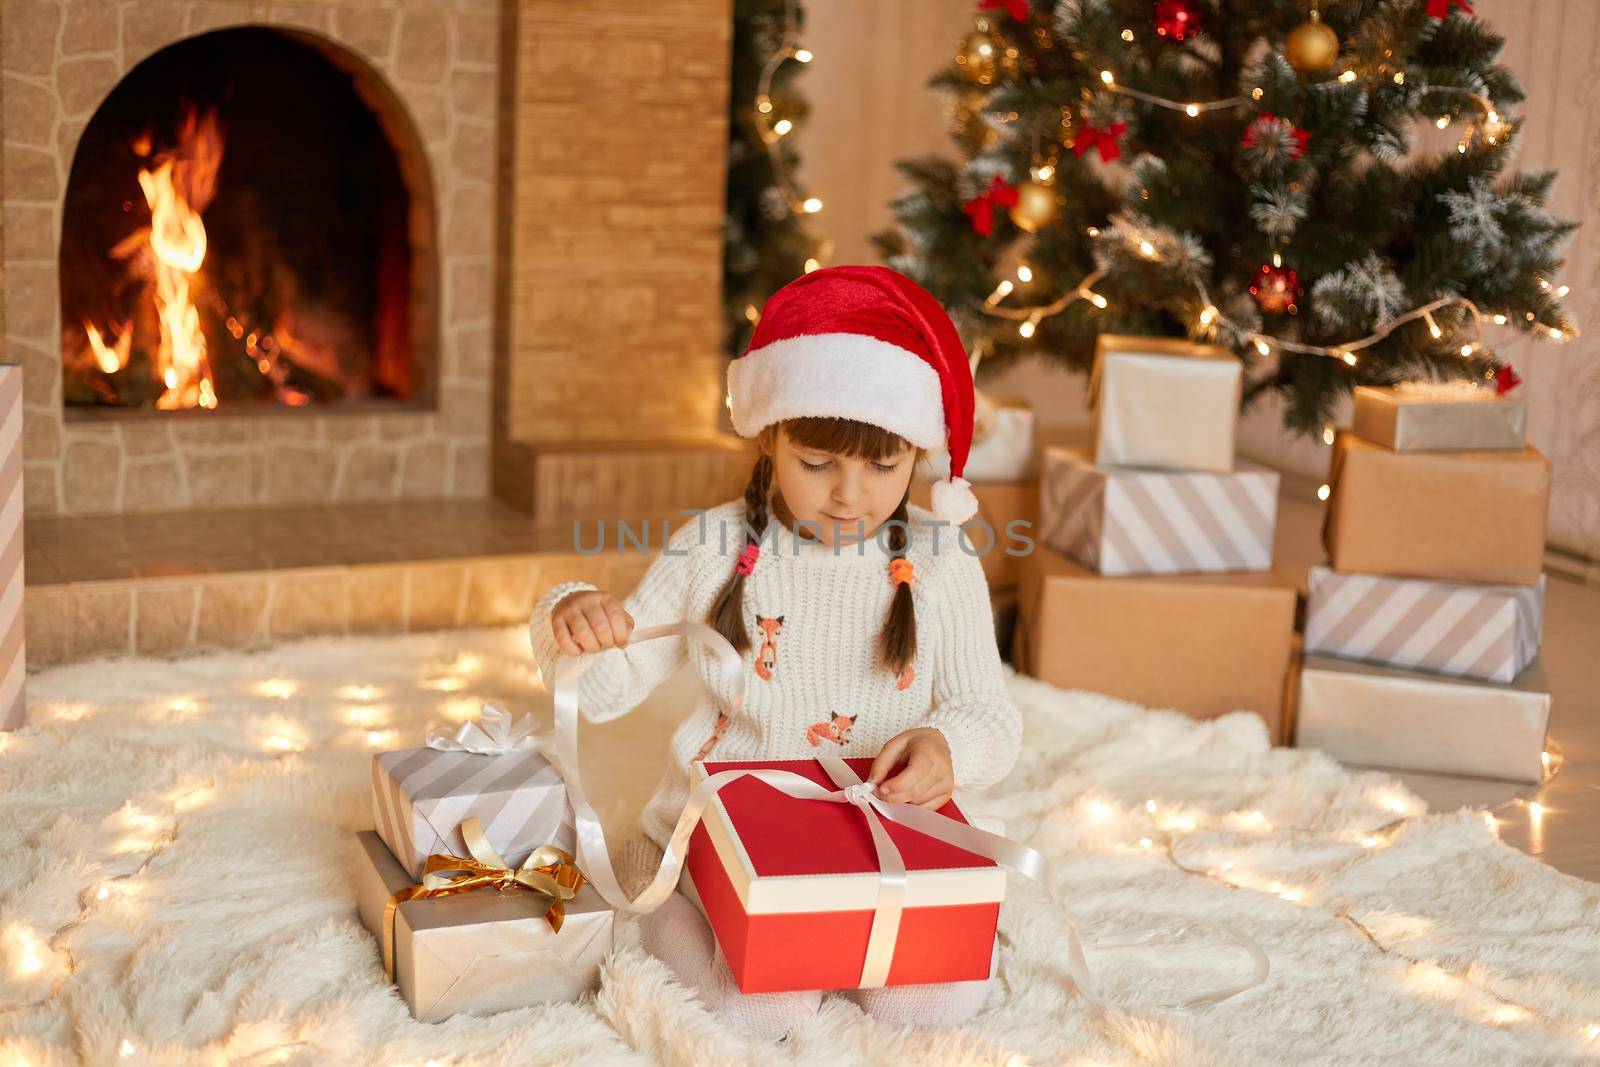 Cute female kid with pigtails sitting on floor and pulling ribbon from her present box, opening her gift, wearing pullover and santa hat, posing with fireplace and Christmas tree on background.